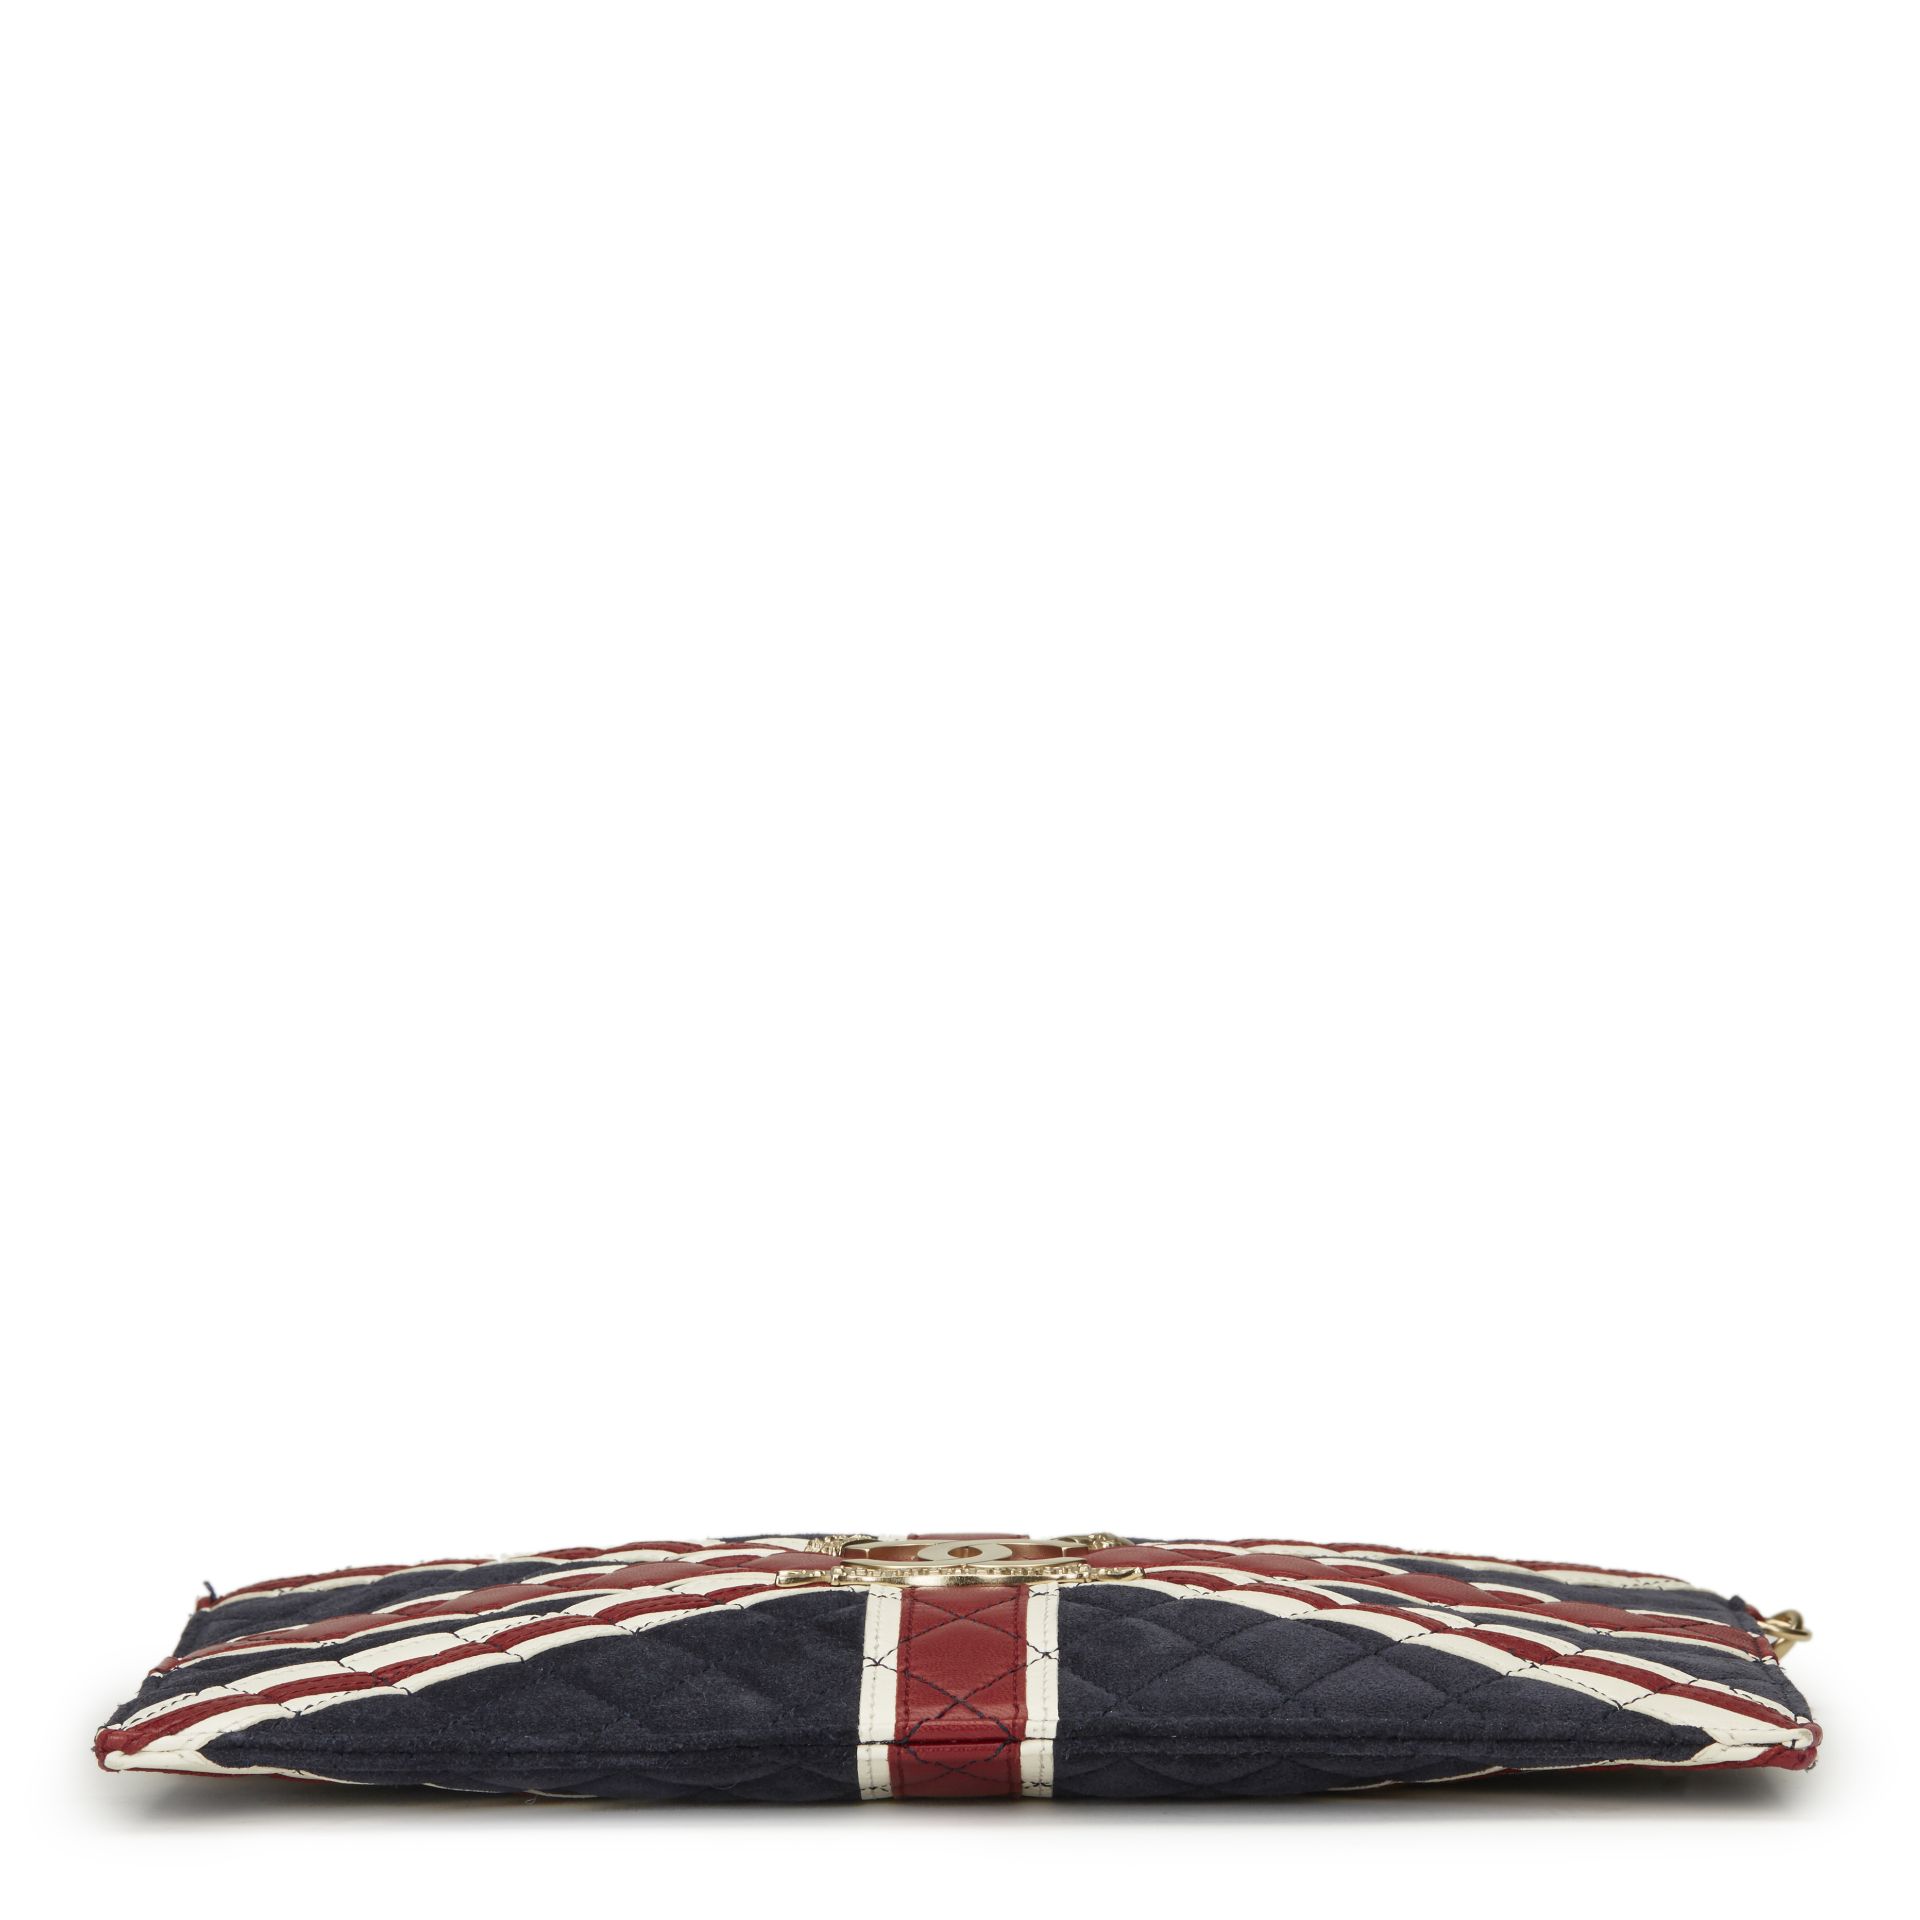 Chanel Union Jack Pouch - Image 5 of 10